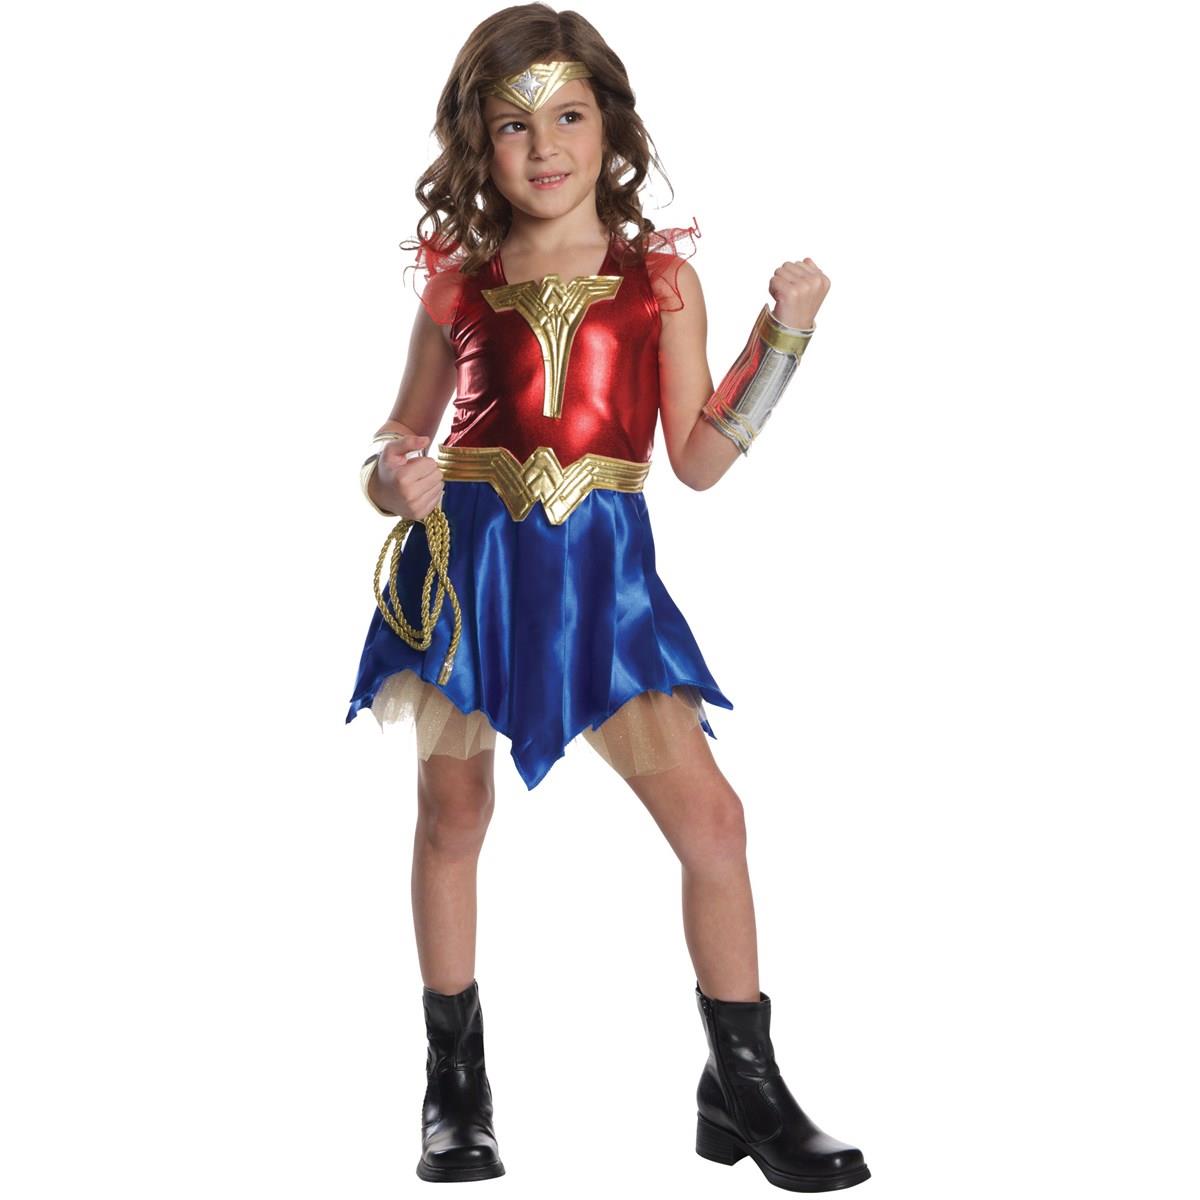 Picture of Imagine 274604 Justice League Wonder Women Deluxe Dress-Up Set - One Size